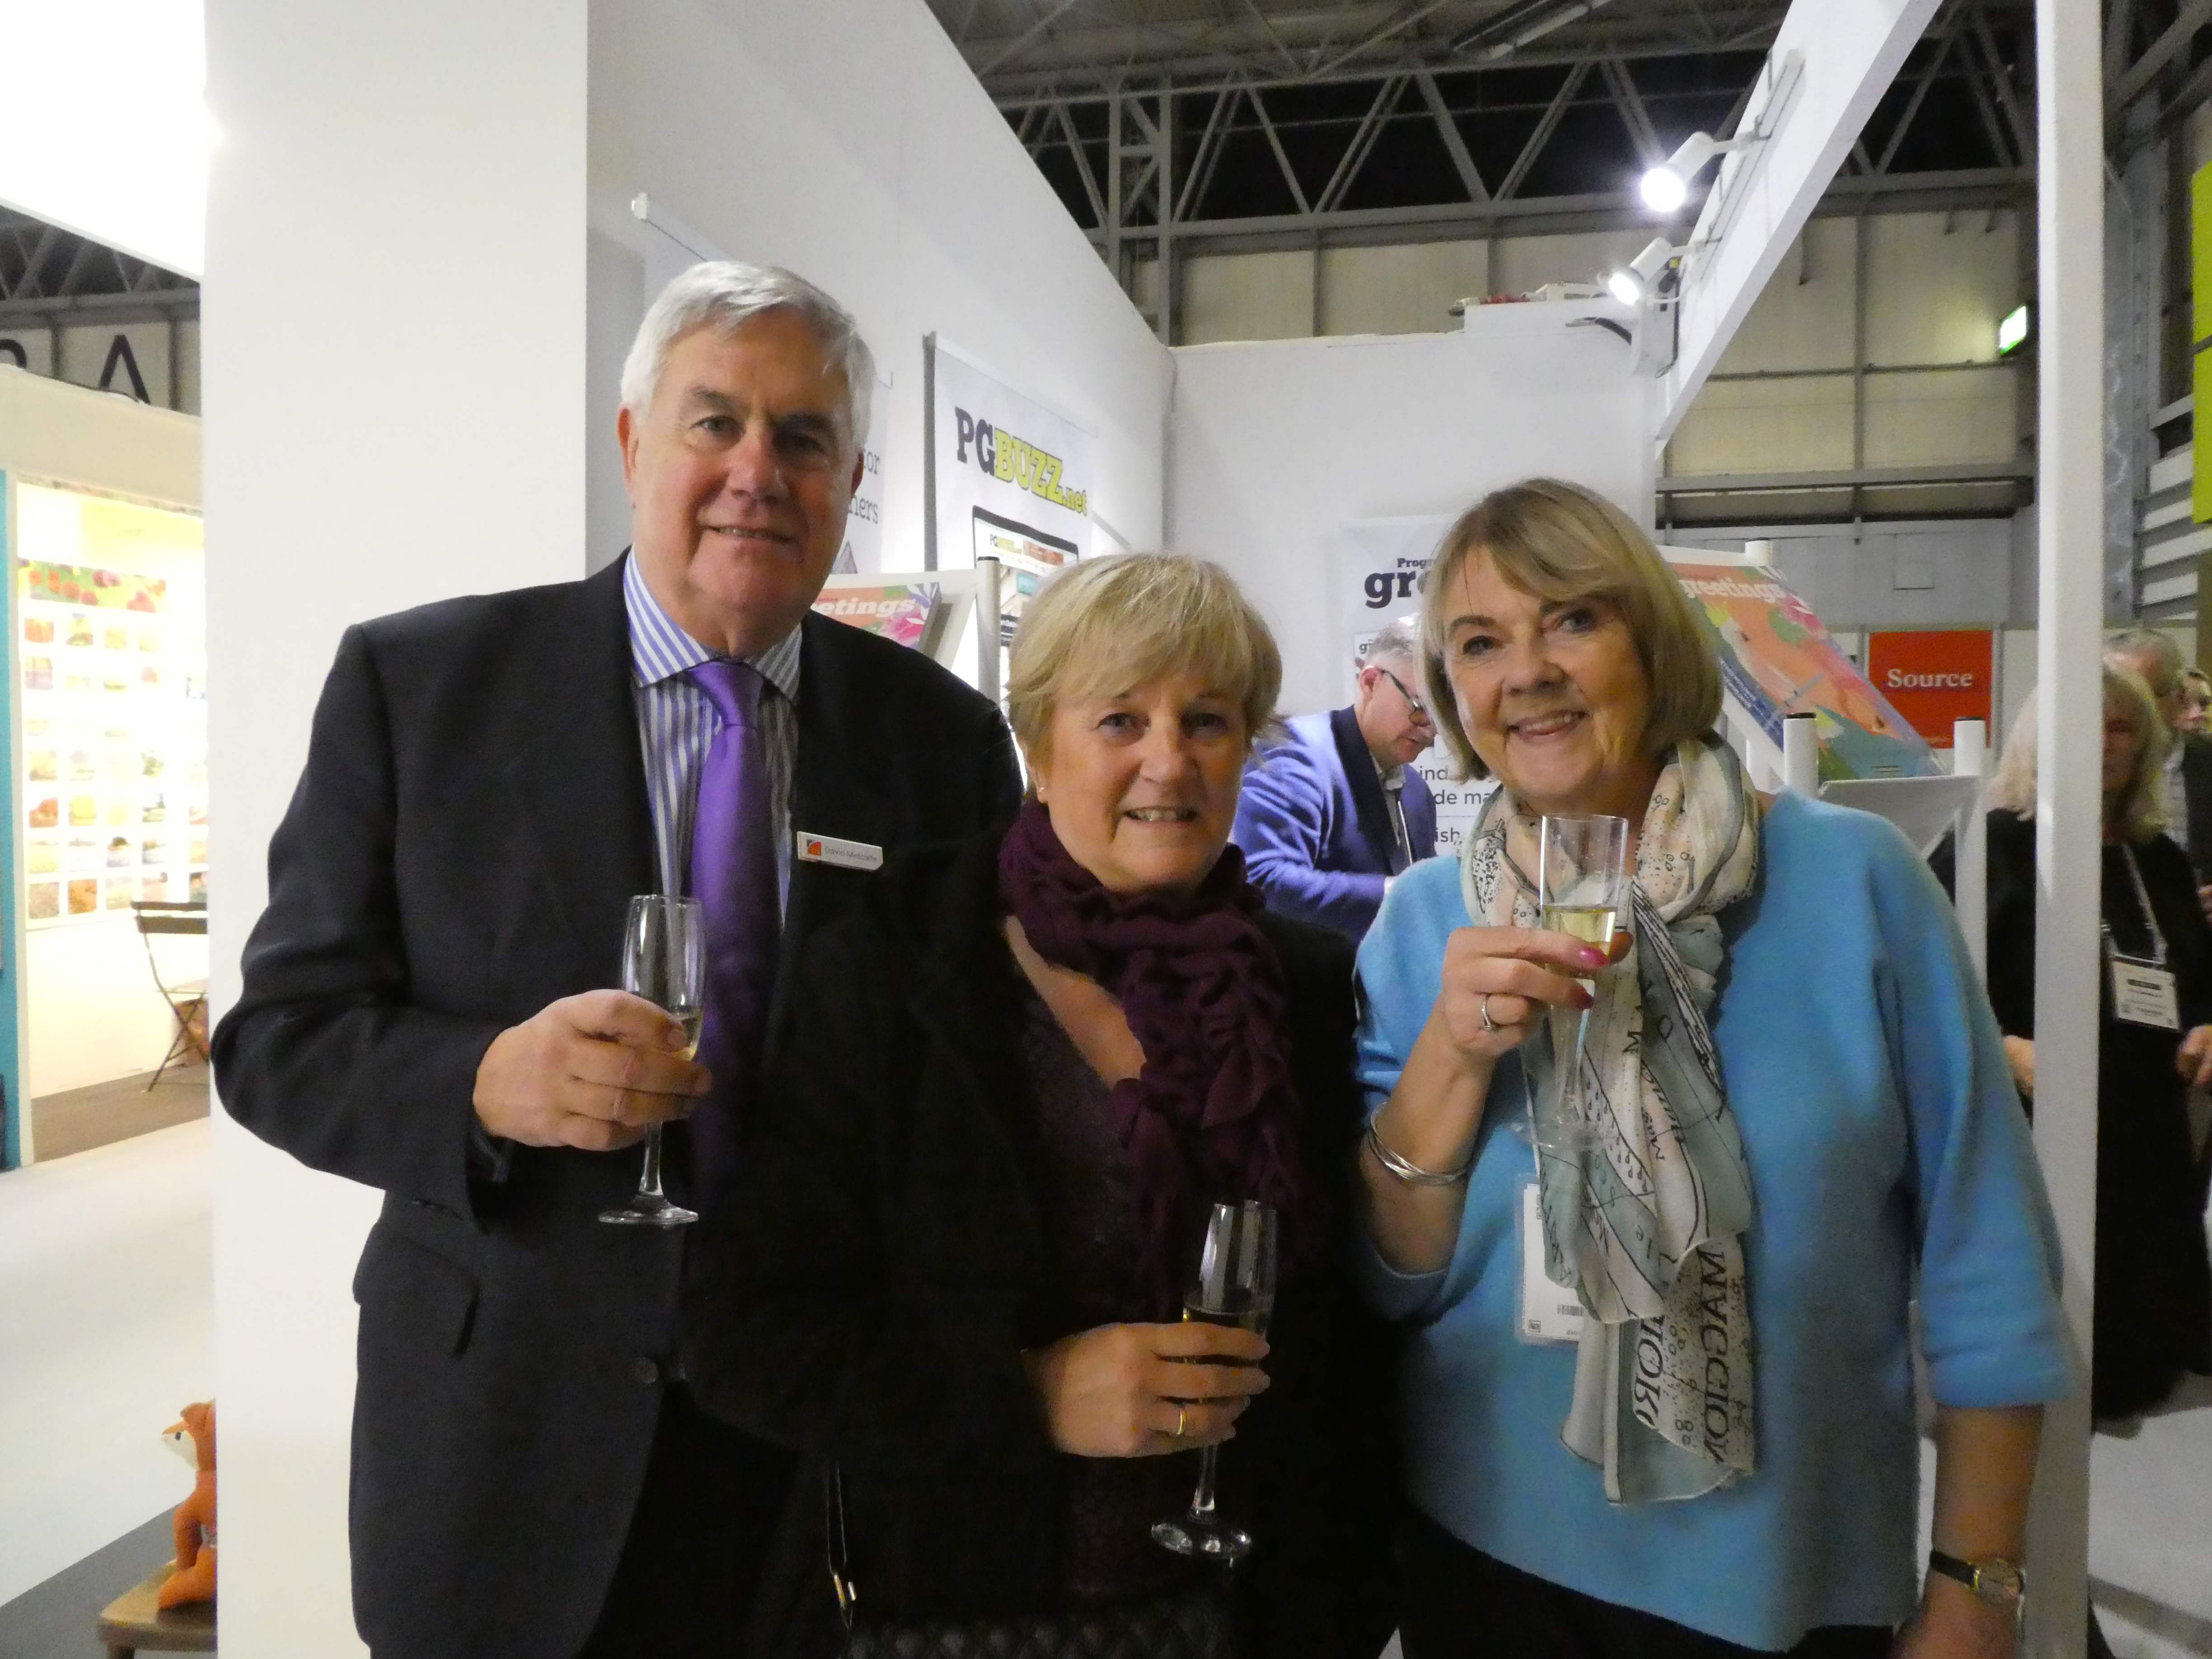 Above: This year was David Metcalfe’s 50th anniversary Spring Fair. Having headed up the running of the show for many years, and having continued as a consultant for several years, this was his swansong. There was a toast to the great man on the PG stand. Seen here with his wife Brenda (centre) and LB Warehouse’s founder Lynda Raymond. 